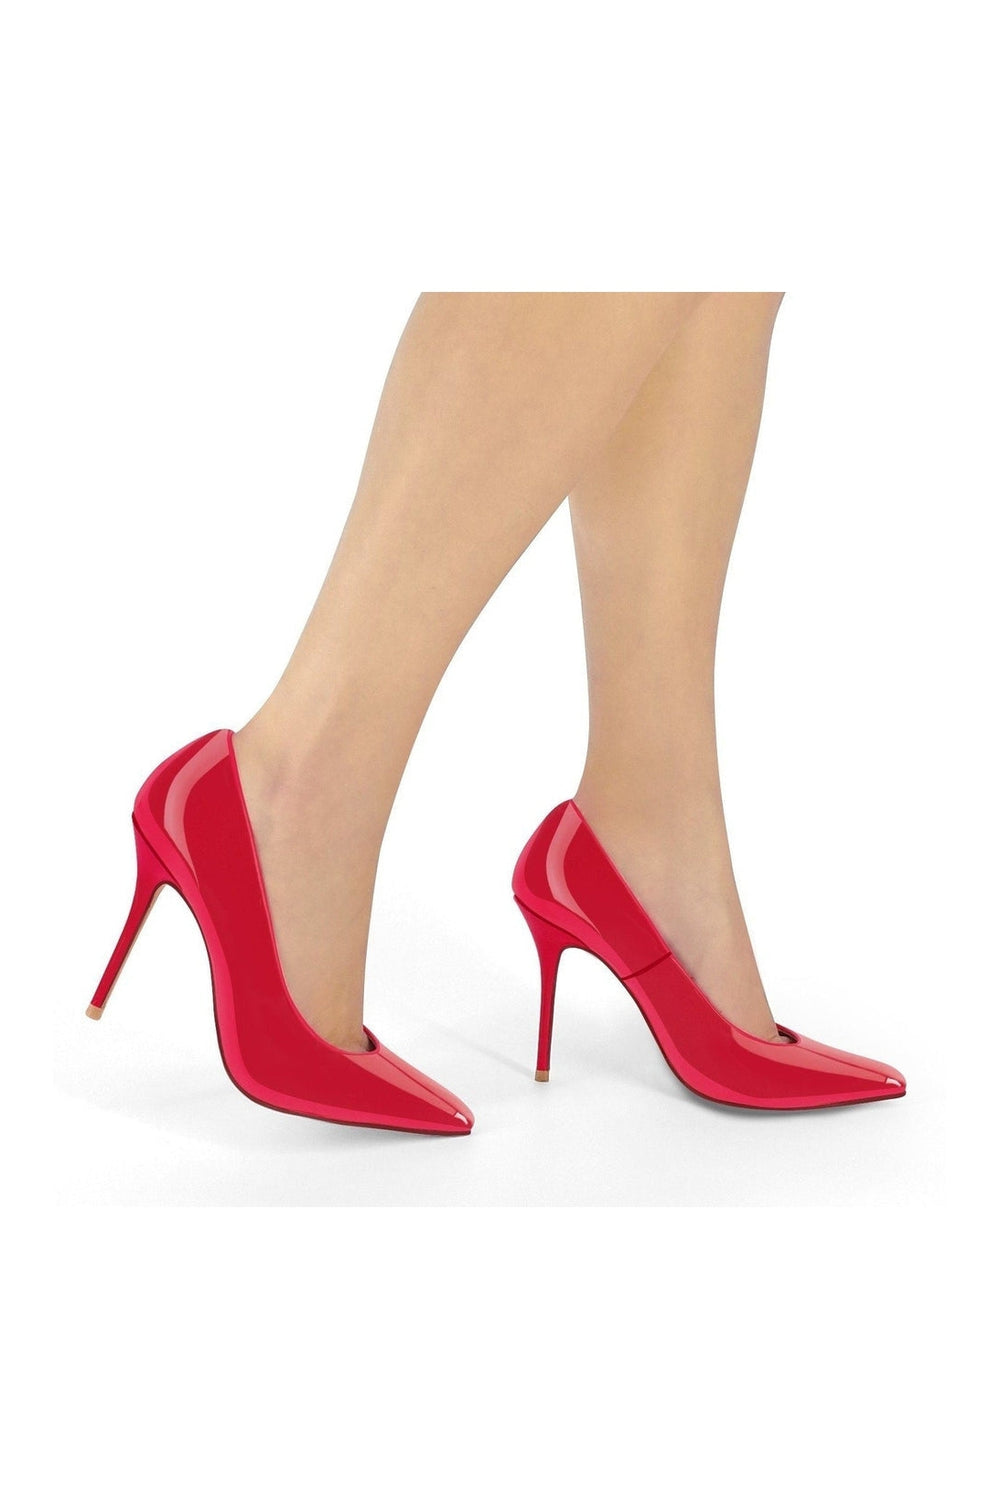 Super Sexy Classic Pump with Micro Stiletto Heel-Pumps-Sexyshoes Signature-Red-SEXYSHOES.COM